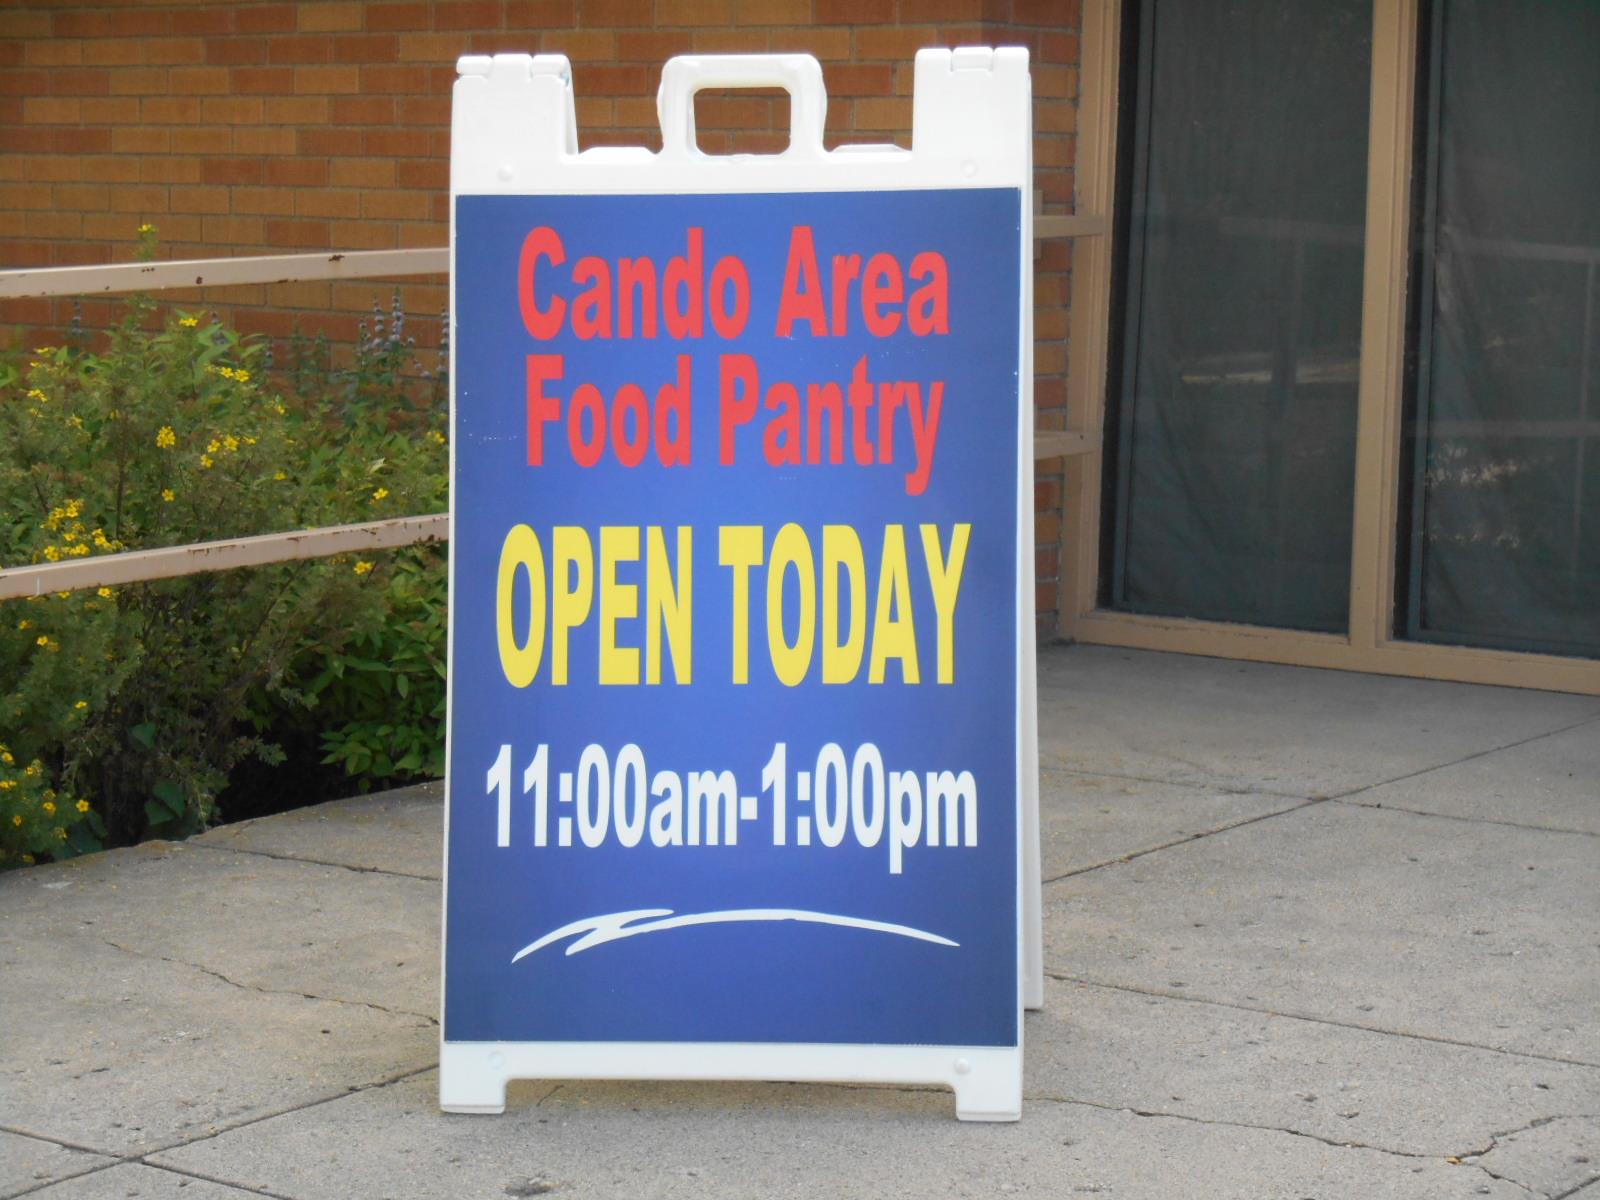 Cando Area Food Pantry